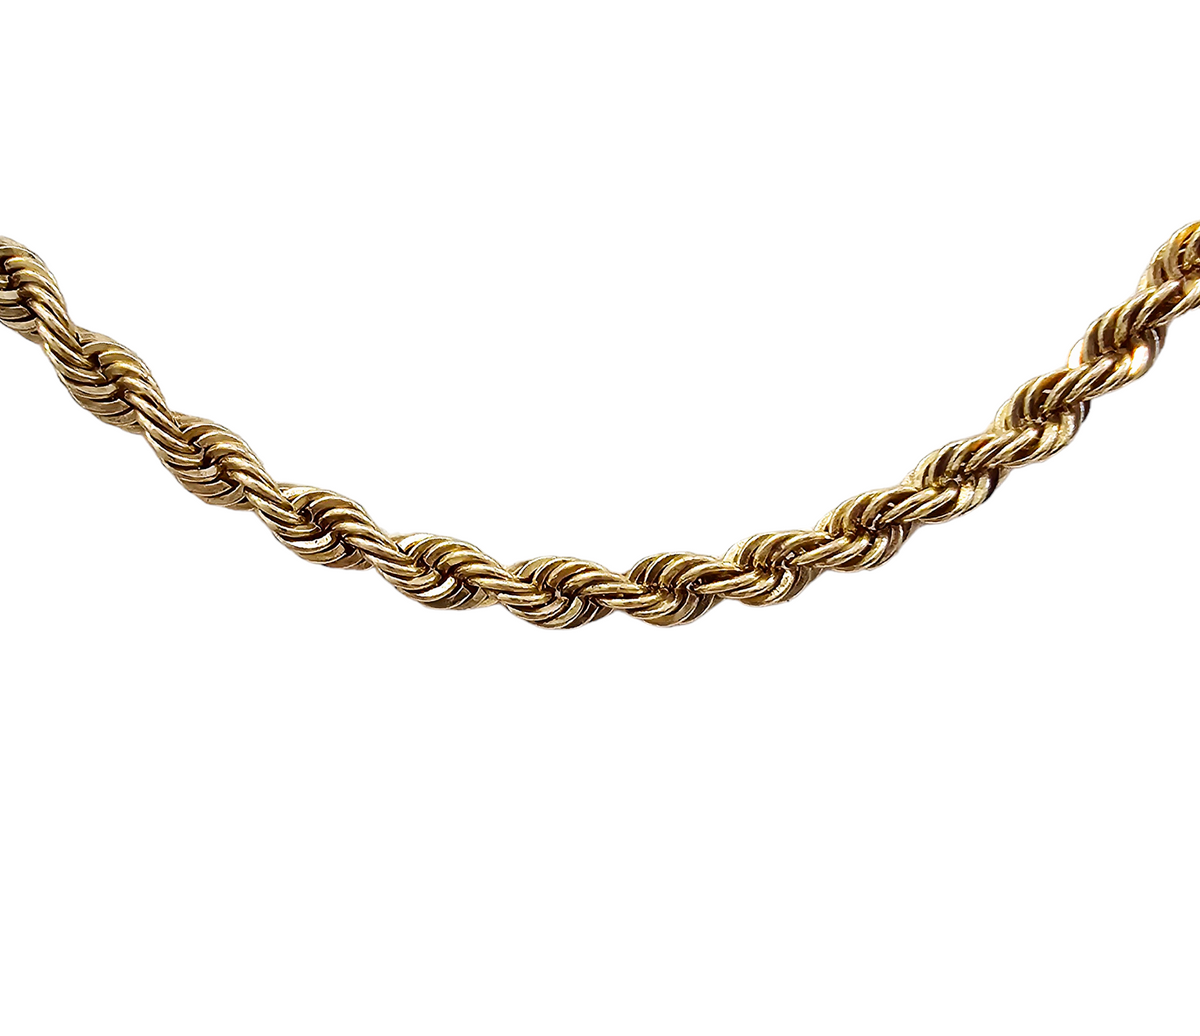 Rope chain 3.26 mm made in solid 14-karat yellow gold 24 inches (RLRQT)